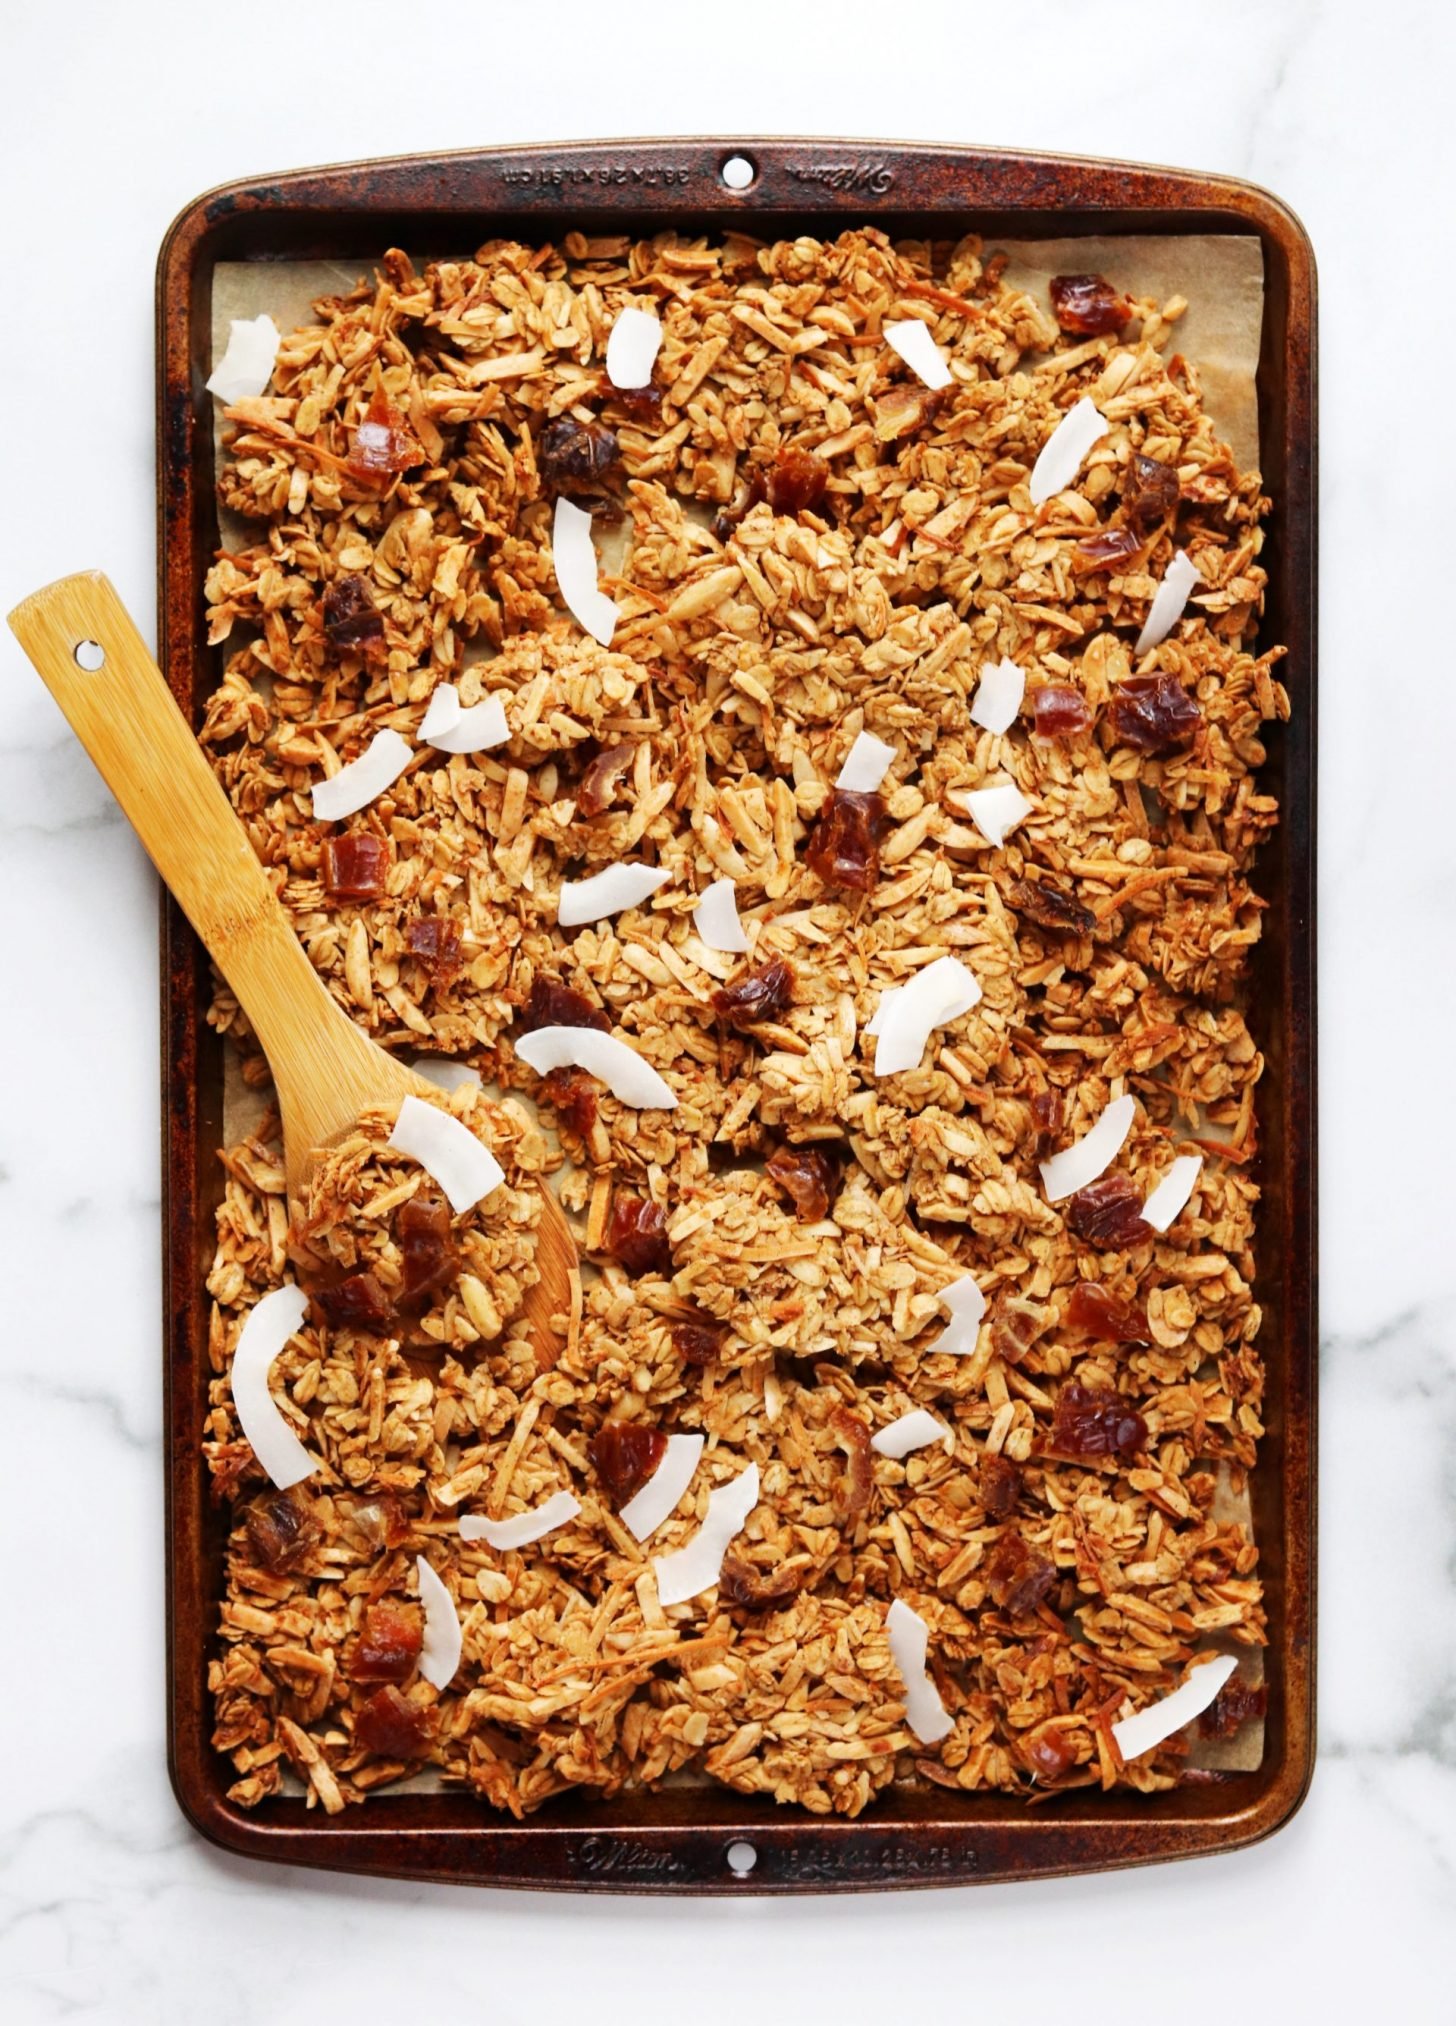 Baking tray of chai spiced granola with coconut flakes and chopped dates